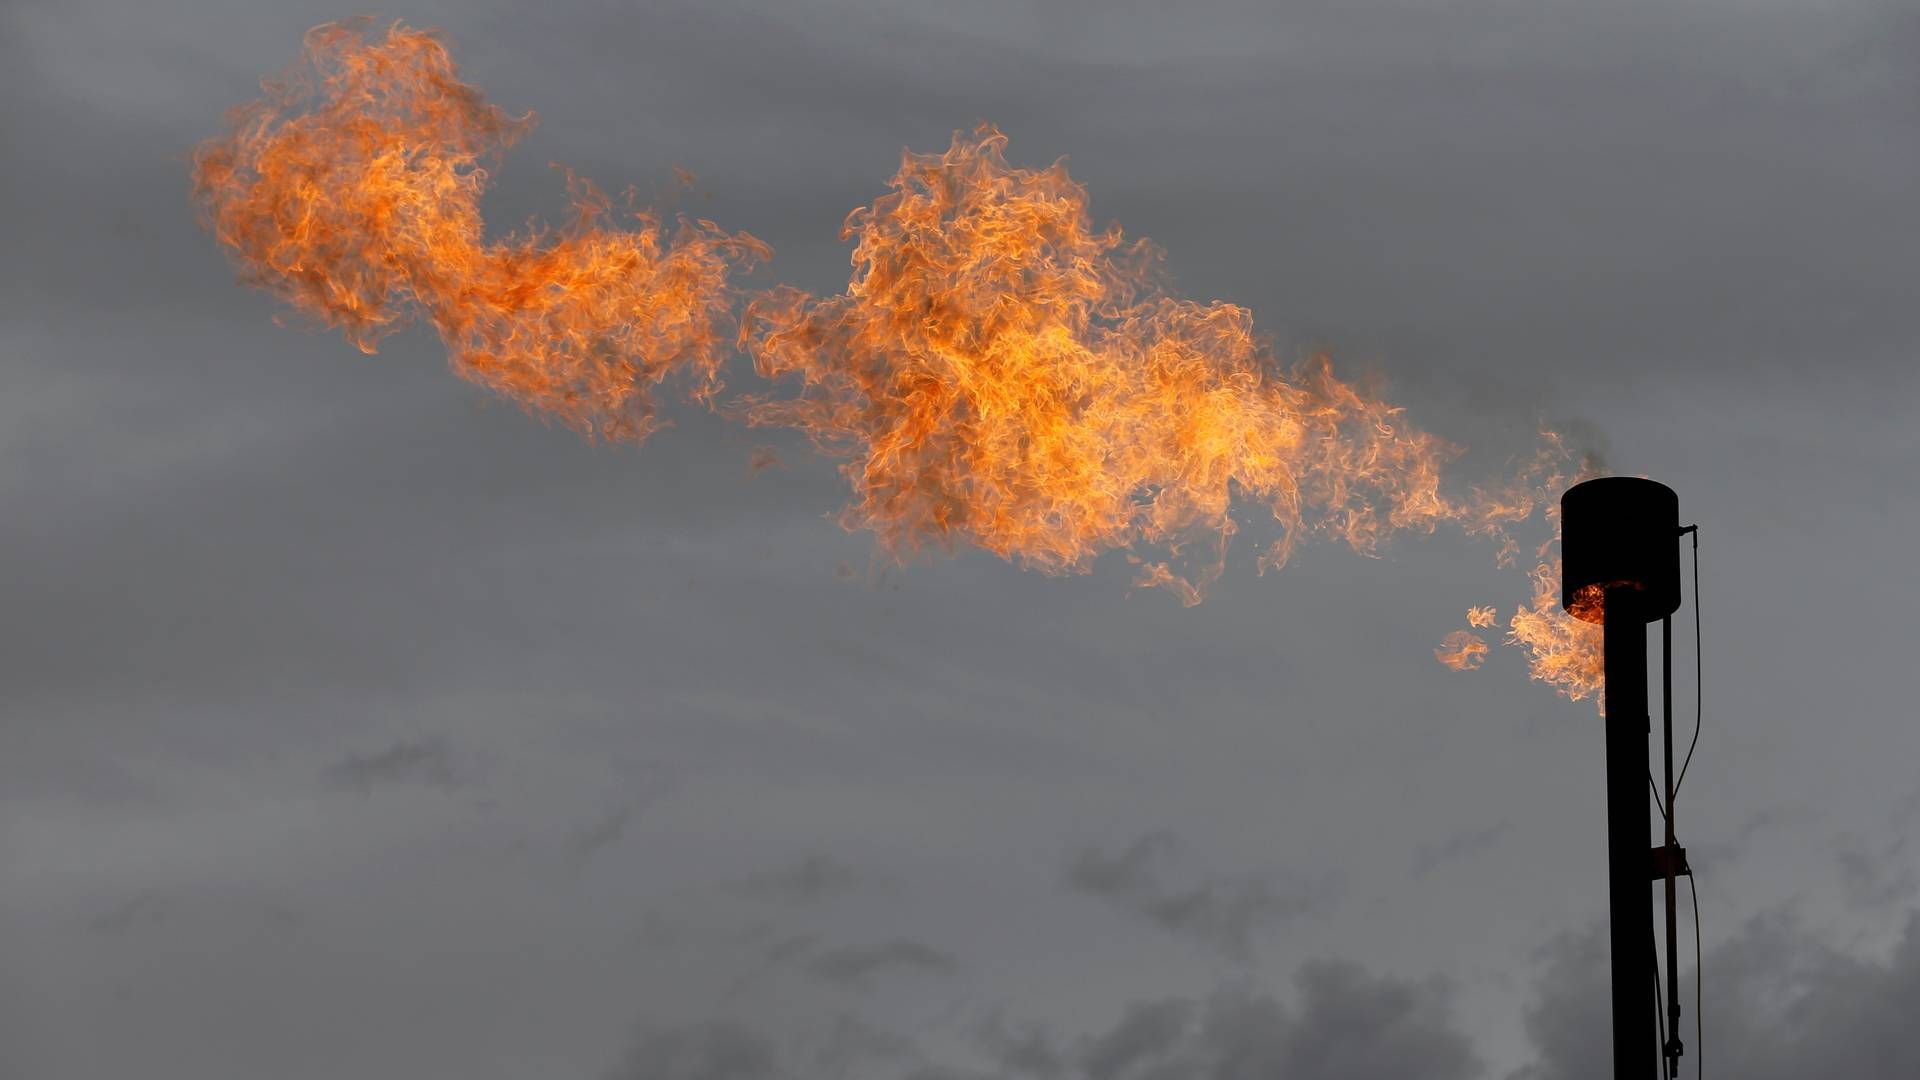 Flaring is the intensional burning of surplus natural gas – often used for safety reasons on, for instance, oil and gas platforms. The practice emits large volume of the potent greenhouse gas methane into the atmosphere and which contributes to melting polar ice. | Photo: ANGUS MORDANT/REUTERS / X06552